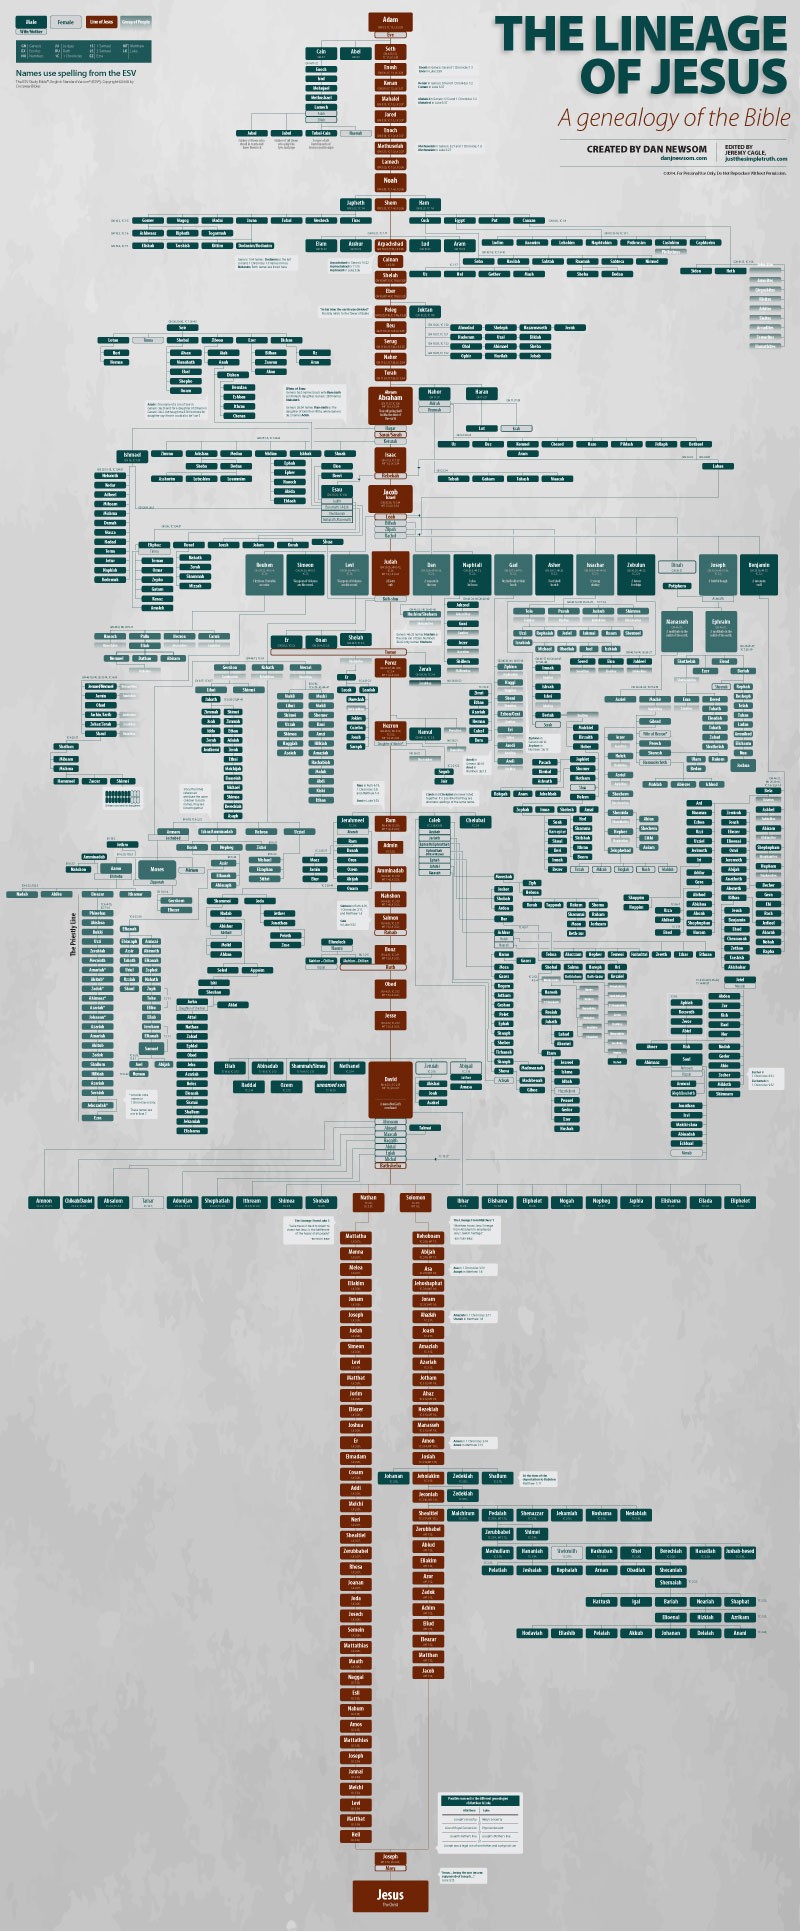 Genealogy of the Bible